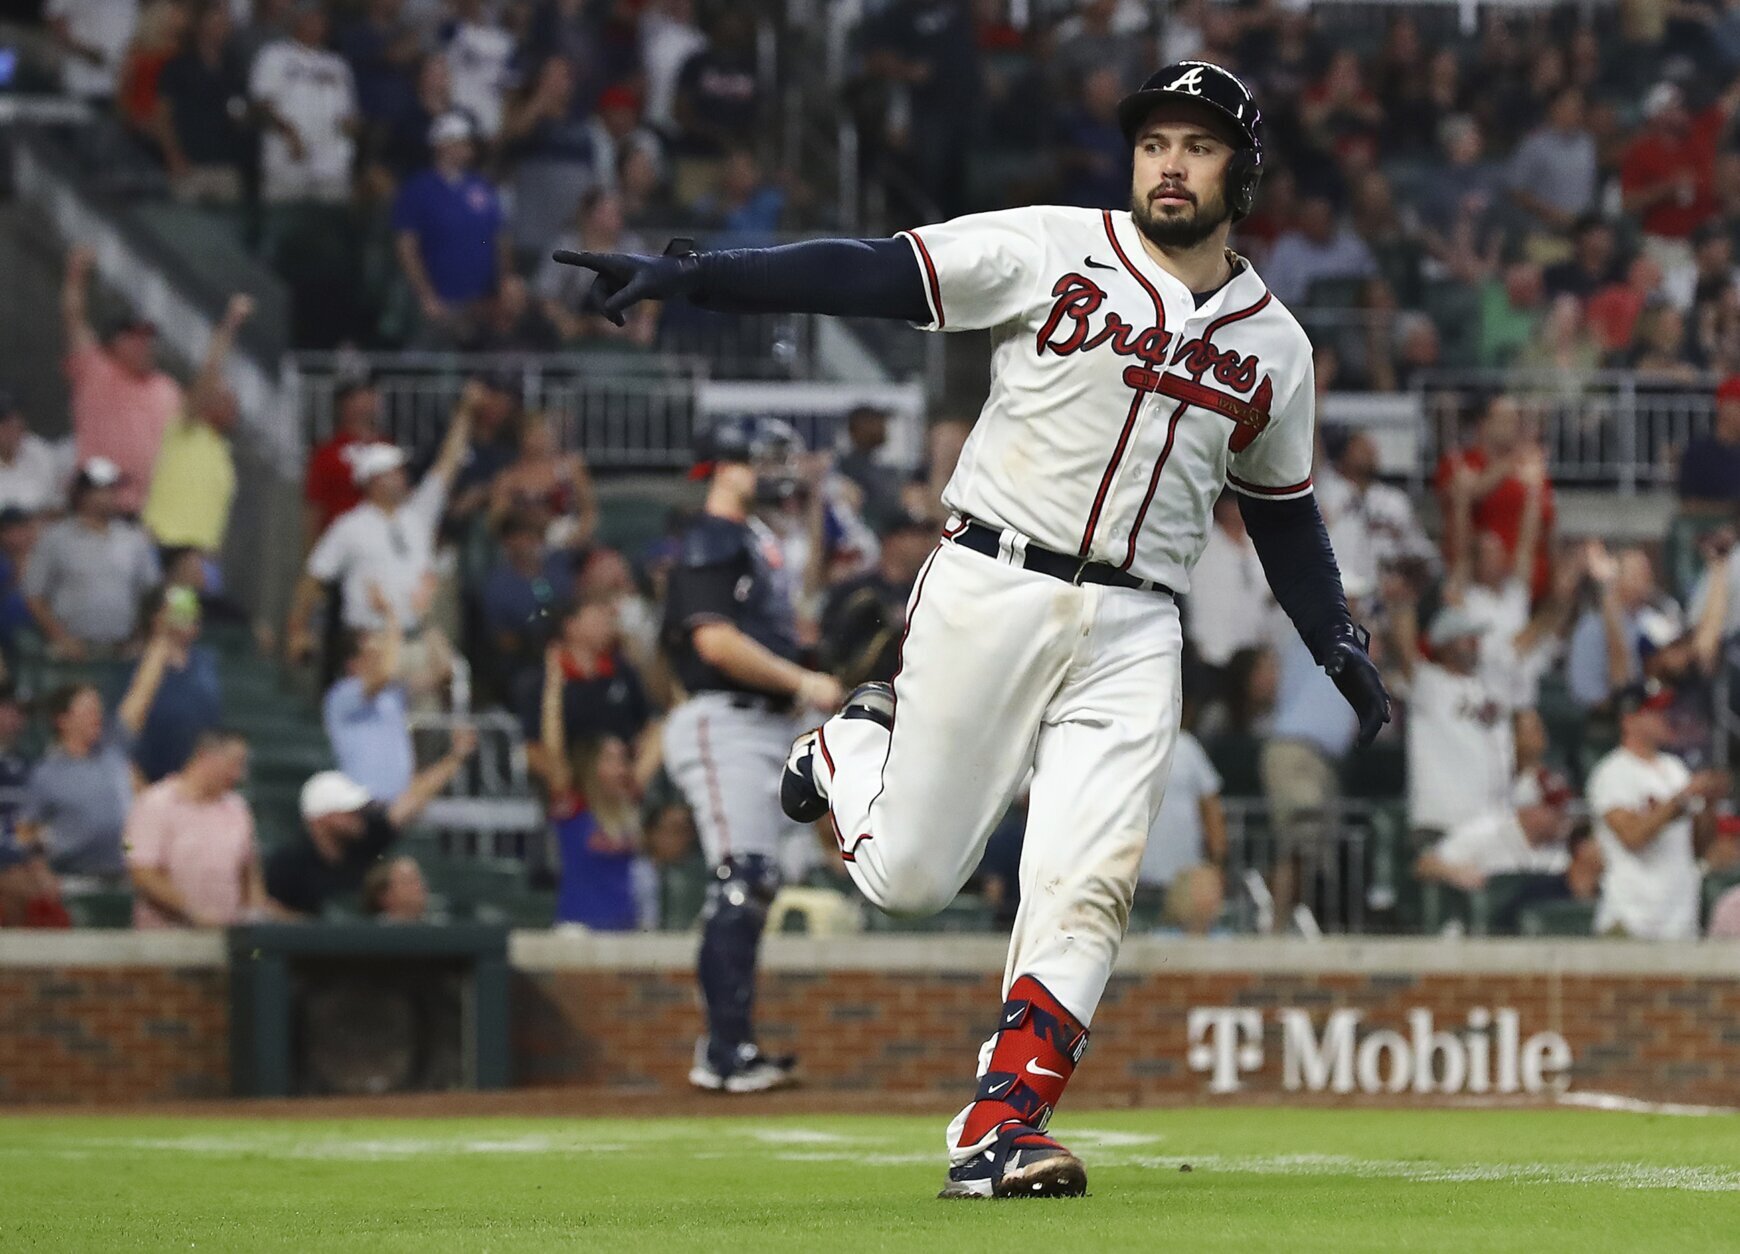 Atlanta Braves The Postseason is quickly becoming the “d'Arnaud